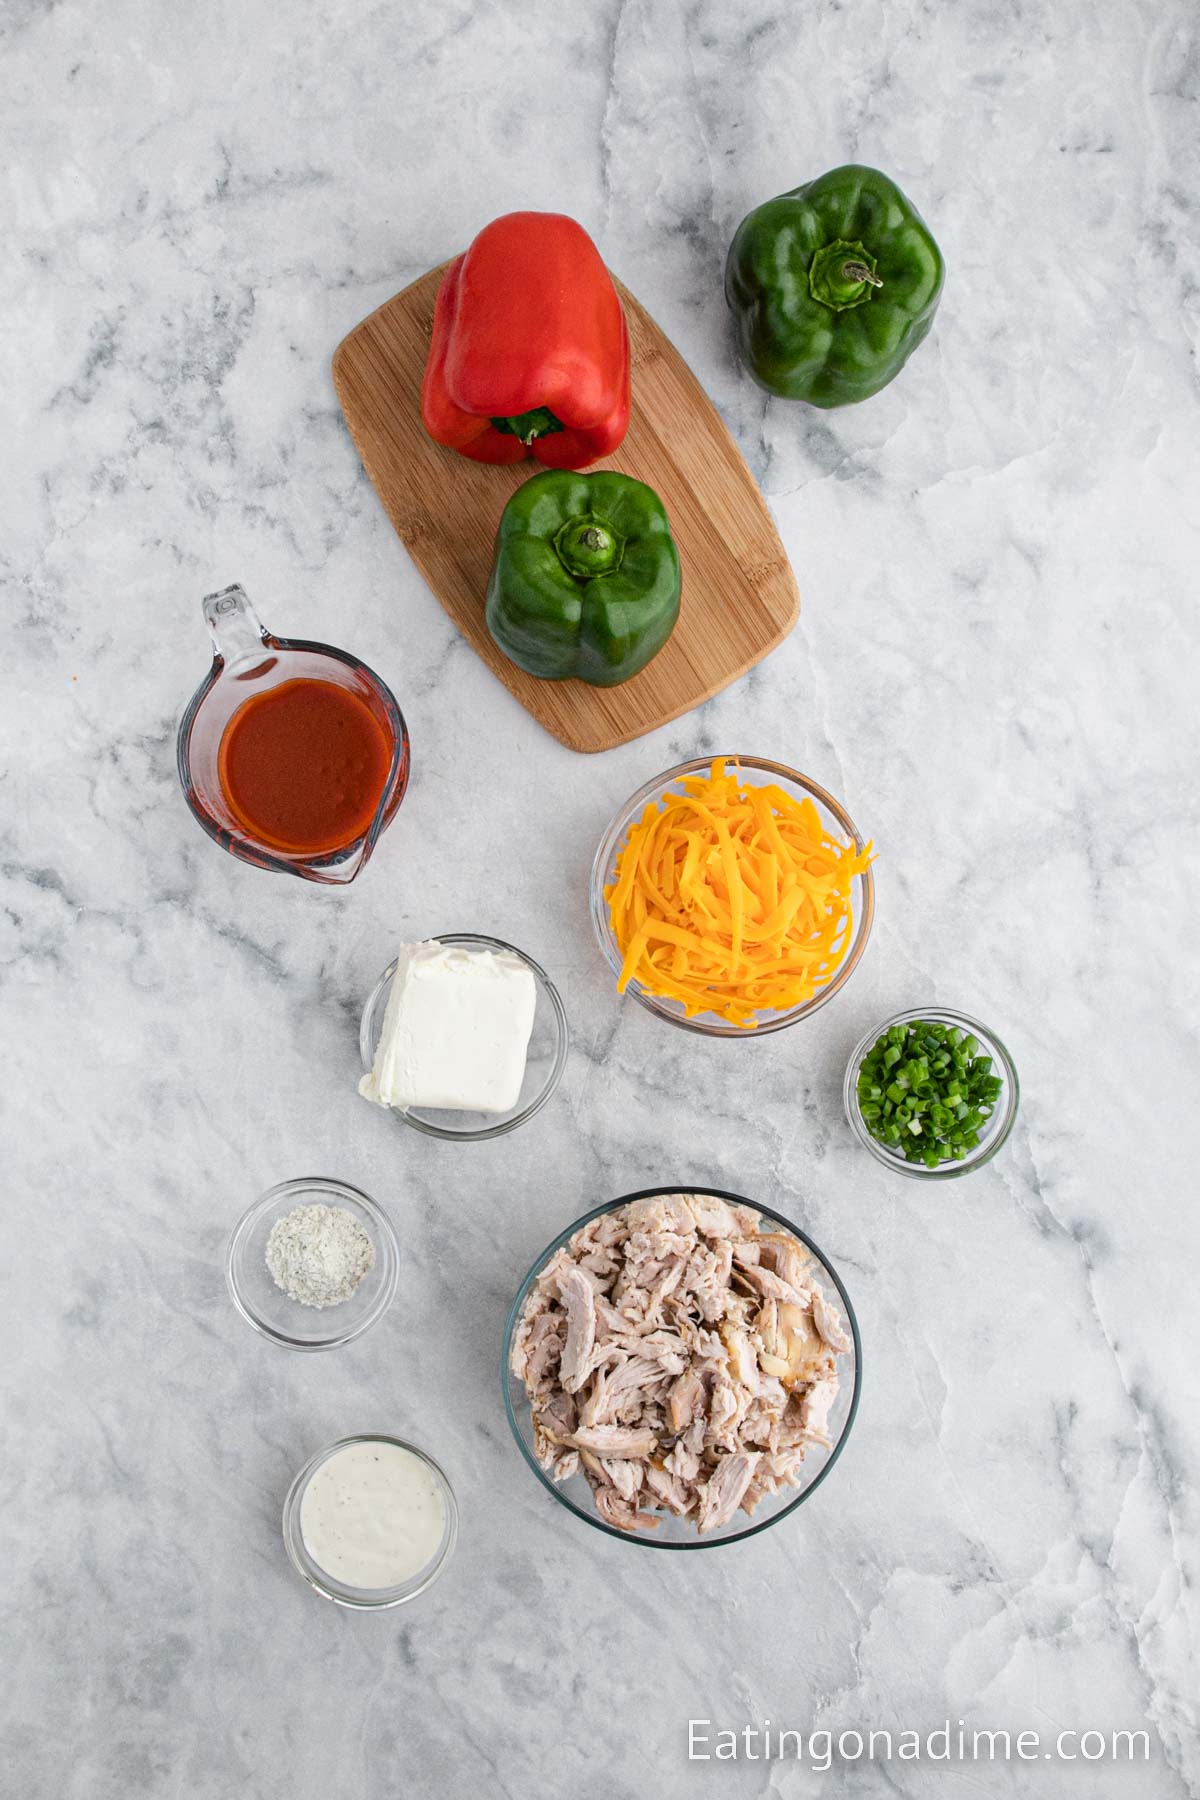 Buffalo Chicken Stuffed Peppers ingredients - bell peppers, shredded chicken, cream cheese, buffalo sauce, ranch seasoning mix, green onions, ranch dressing